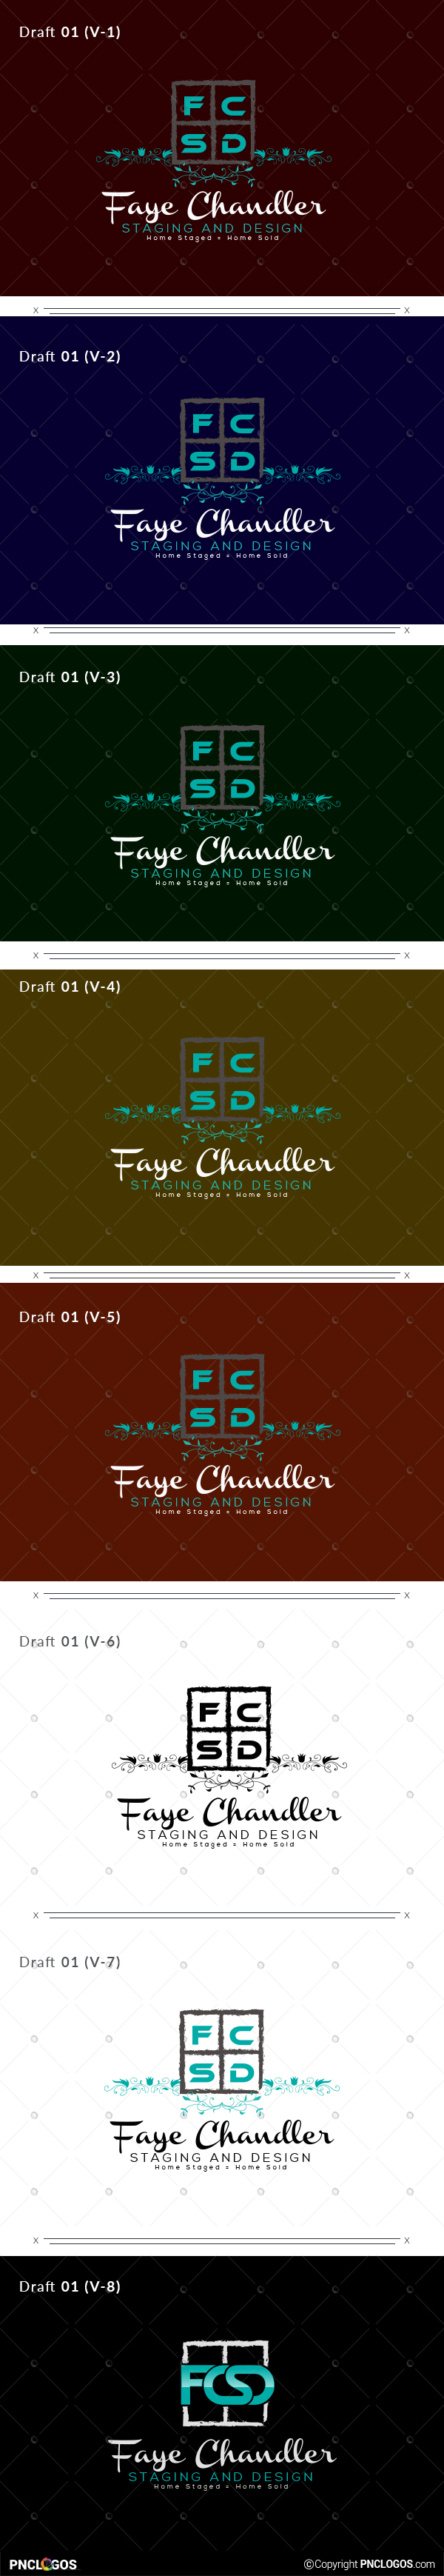 Faye Chandler Staging and Design Logo